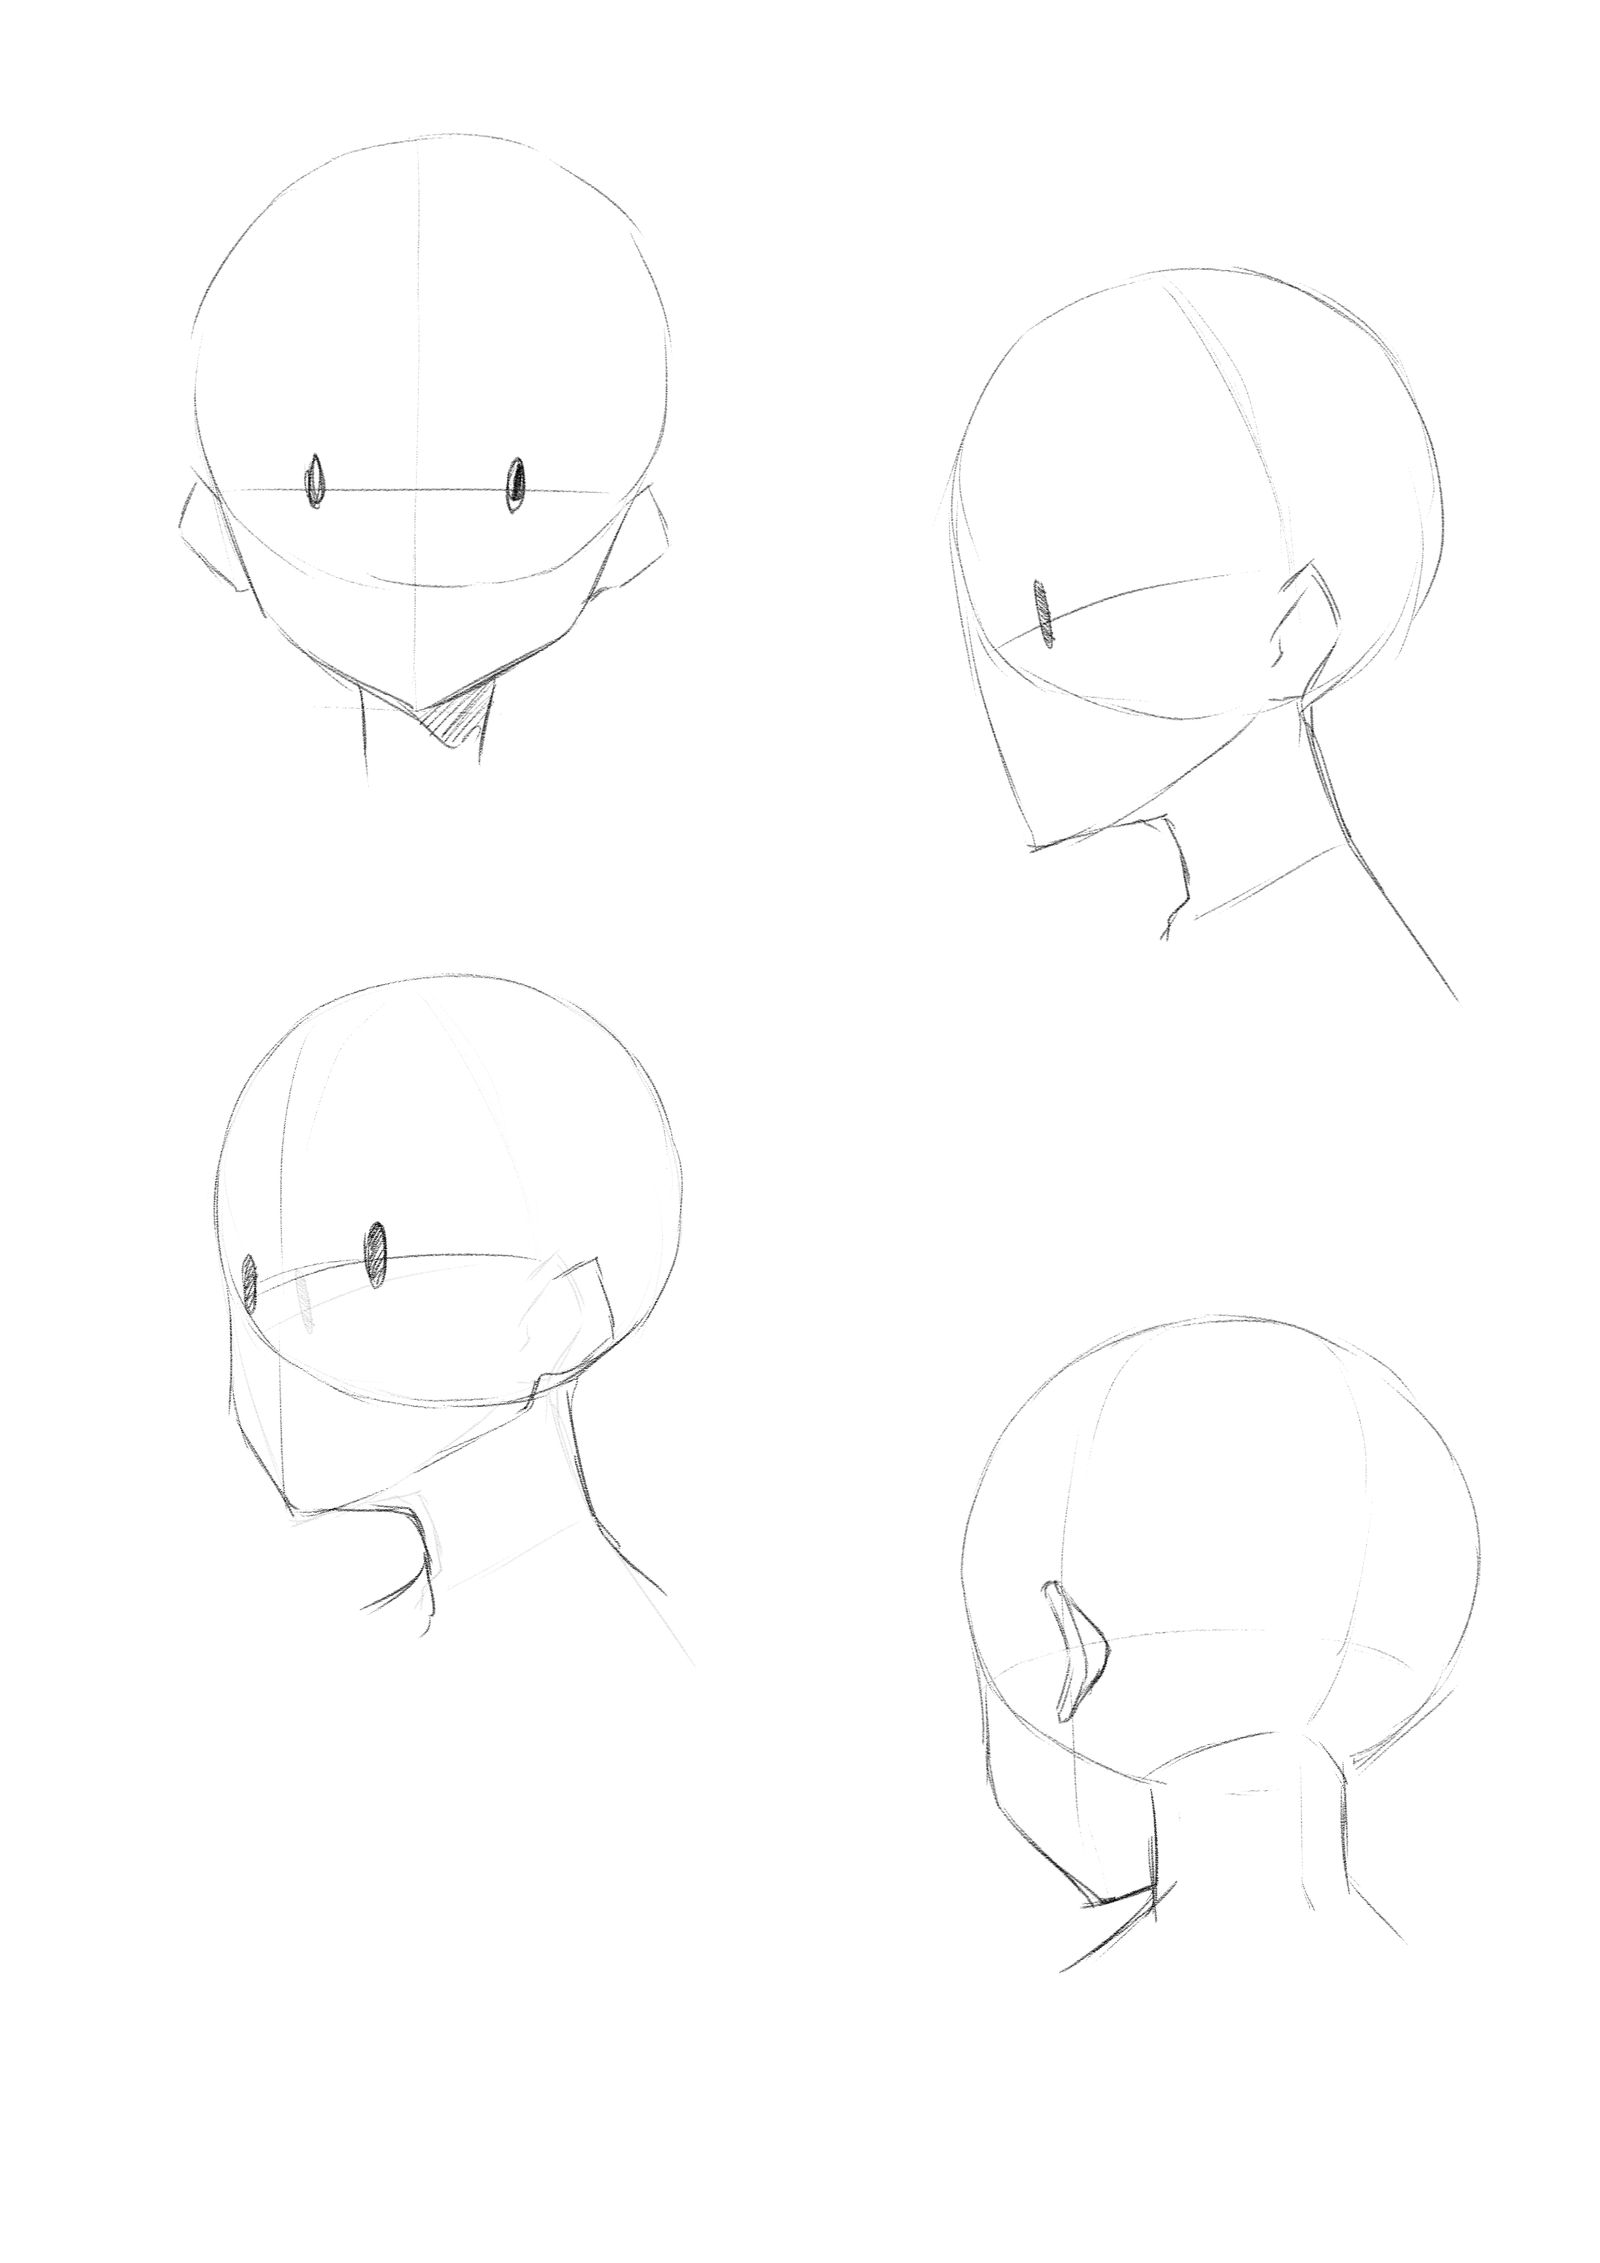 Step by Step - Character Face插画图片壁纸